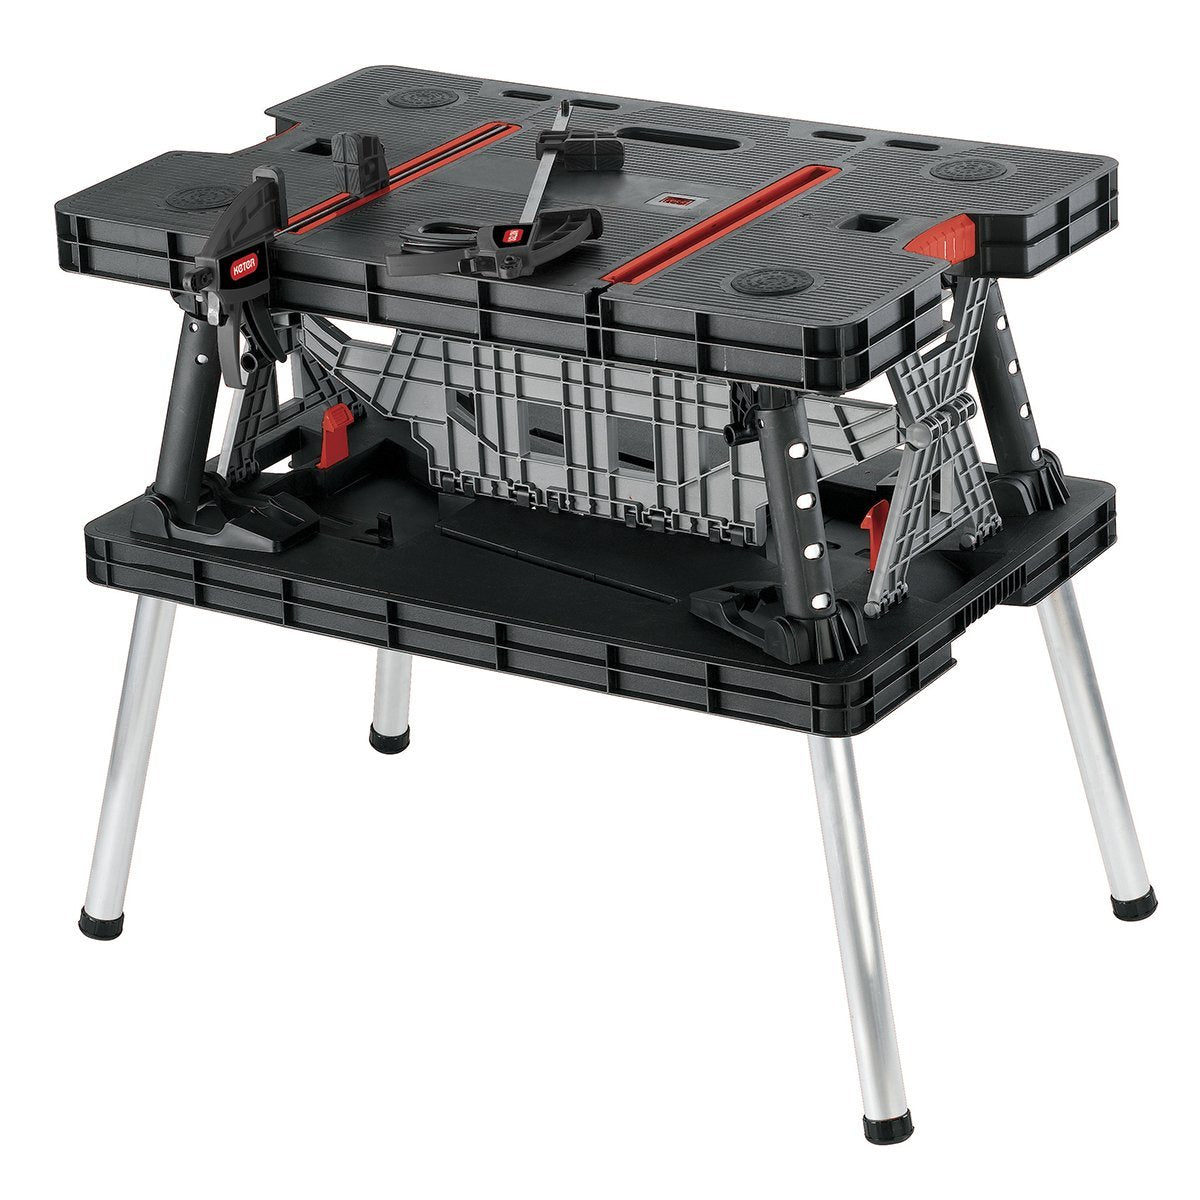 Keter Folding Worktable with Adjustable Height and Clamps - Signature Retail Stores